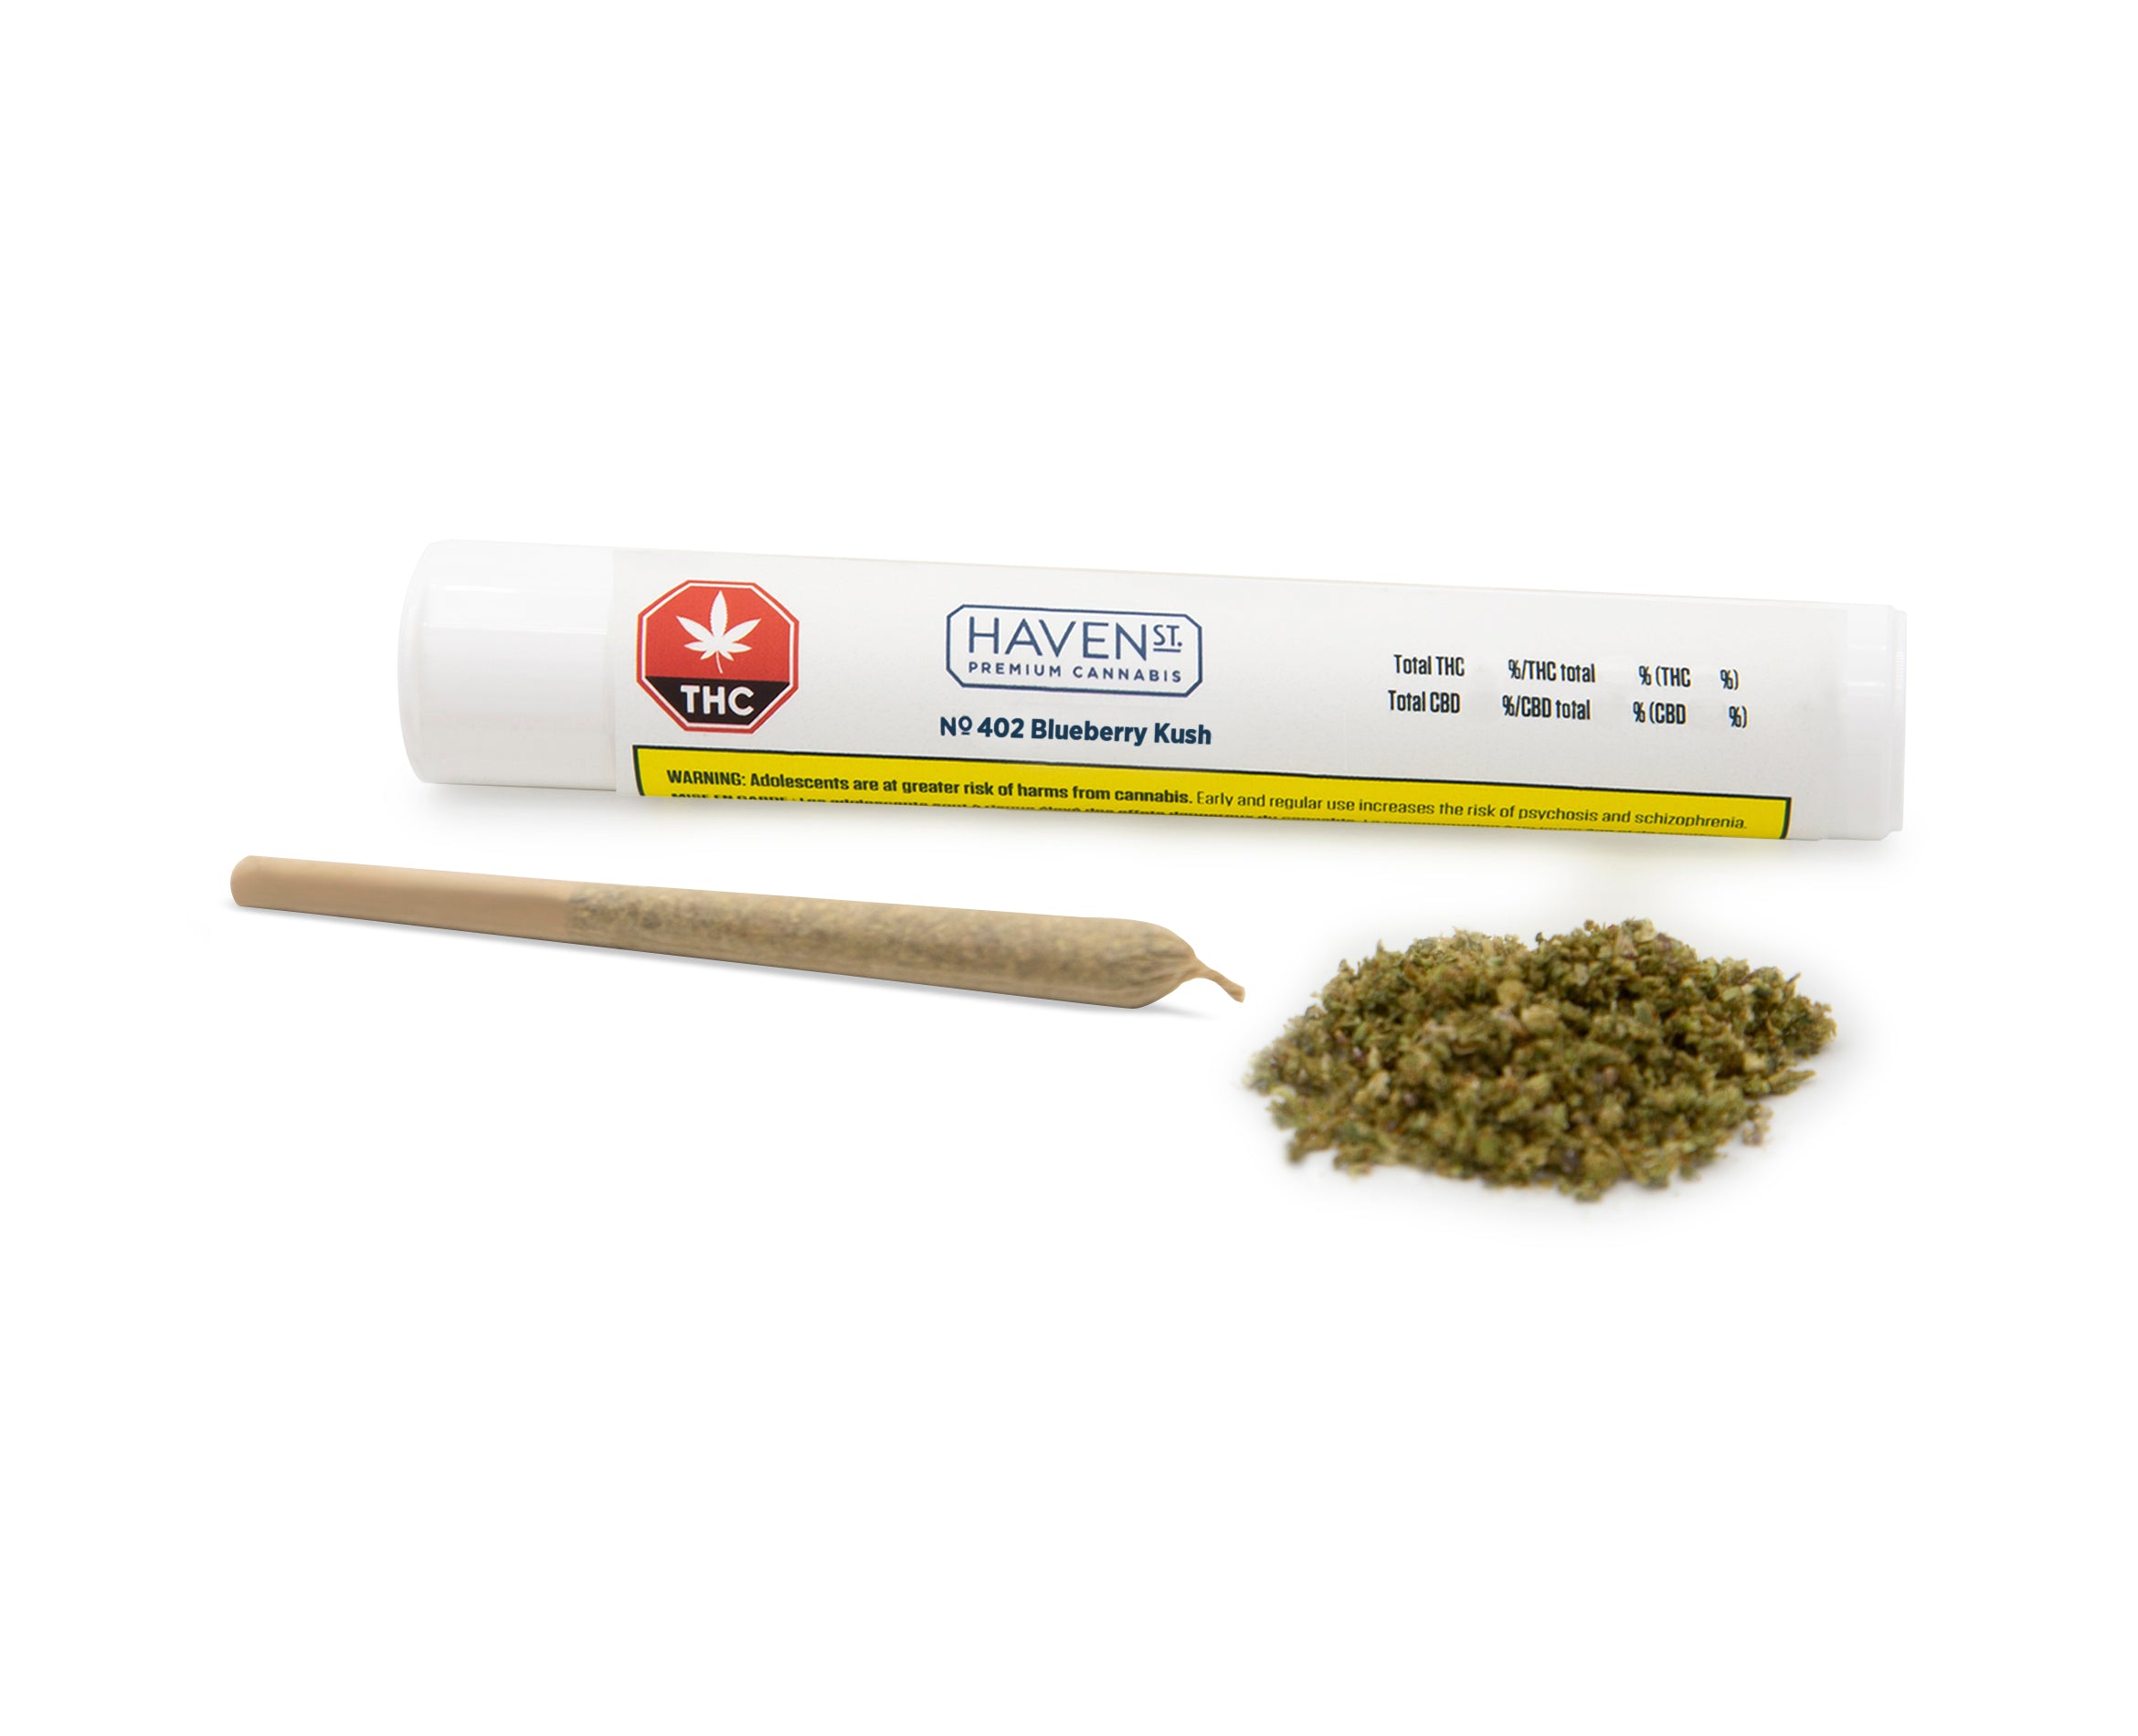 HAVEN ST NO 402 BLUEBERRY KUSH (IND) PRE-ROLL - 0.5G X 1